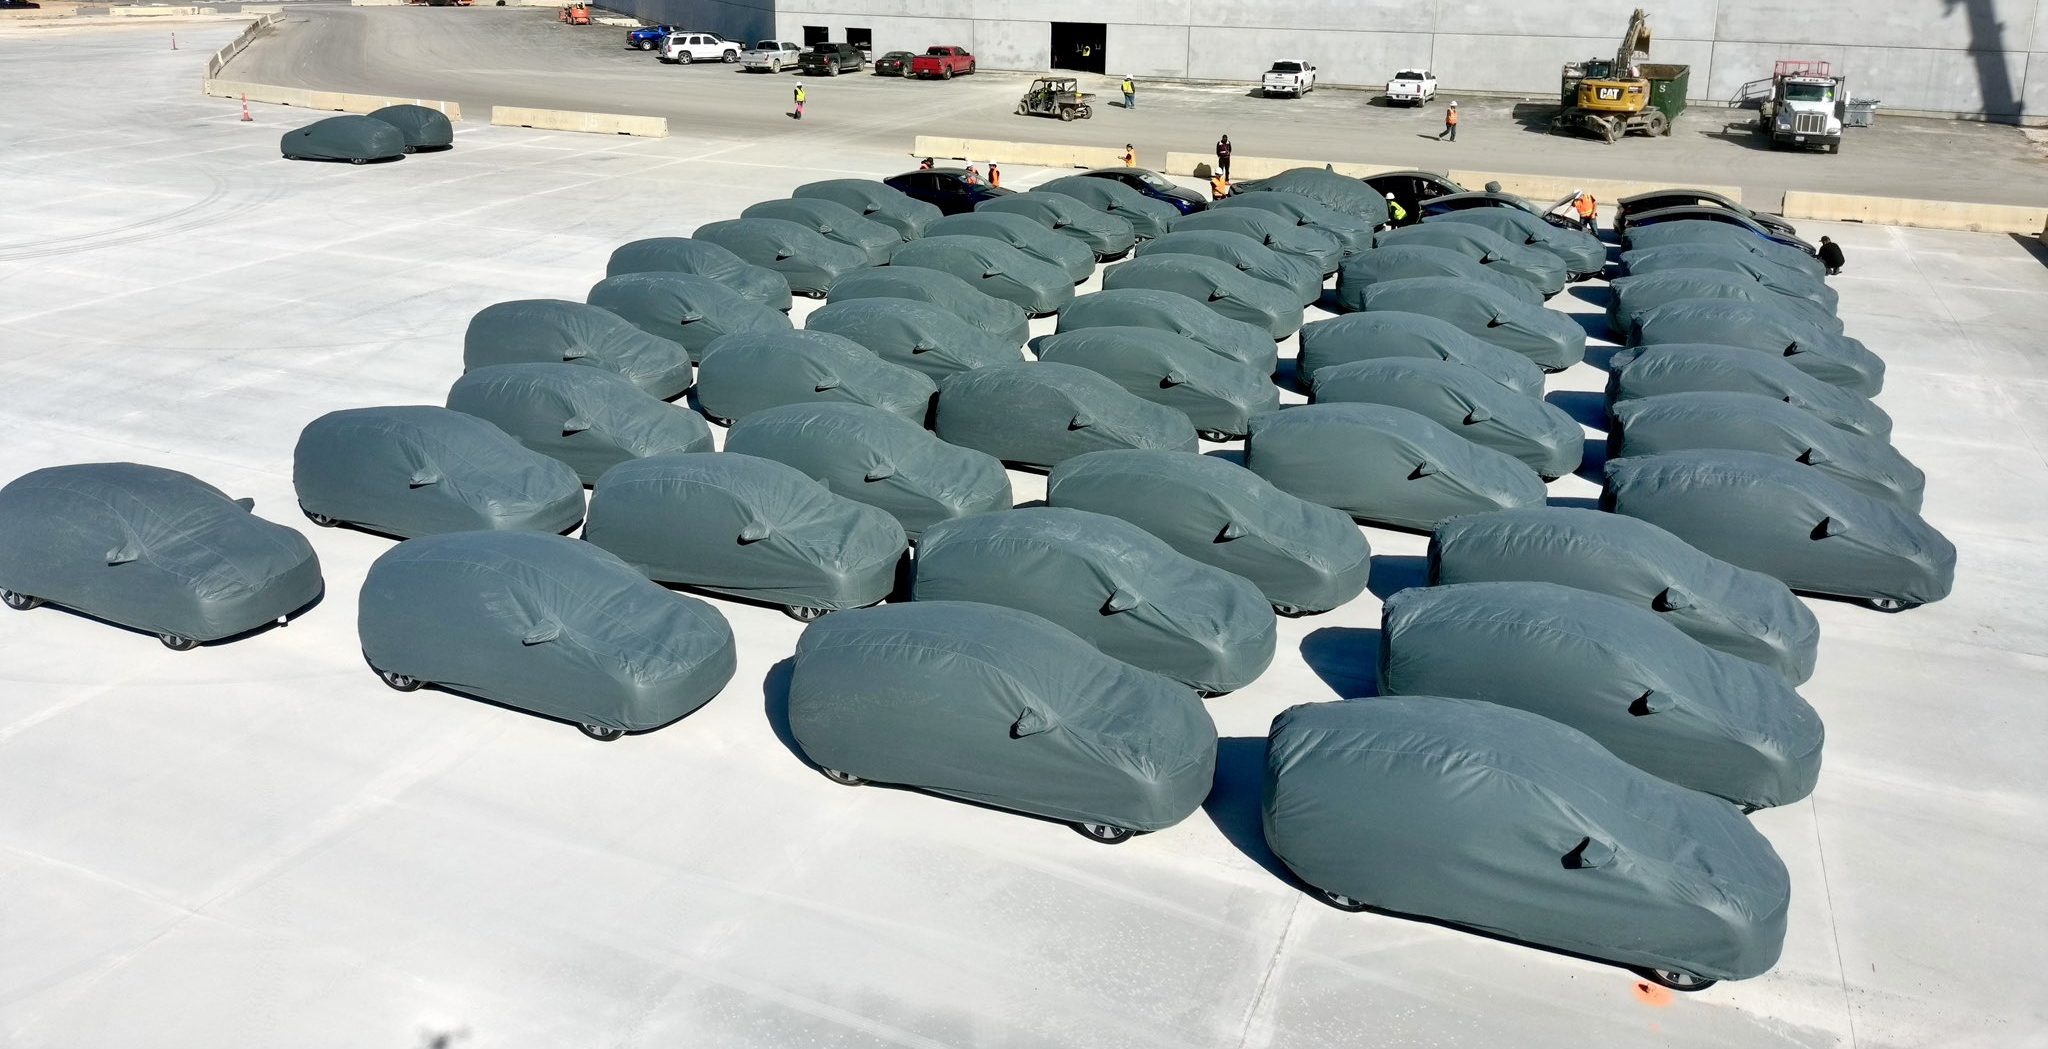 Model Y vehicles at Tesla's Texas Gigafactory ready for shipping